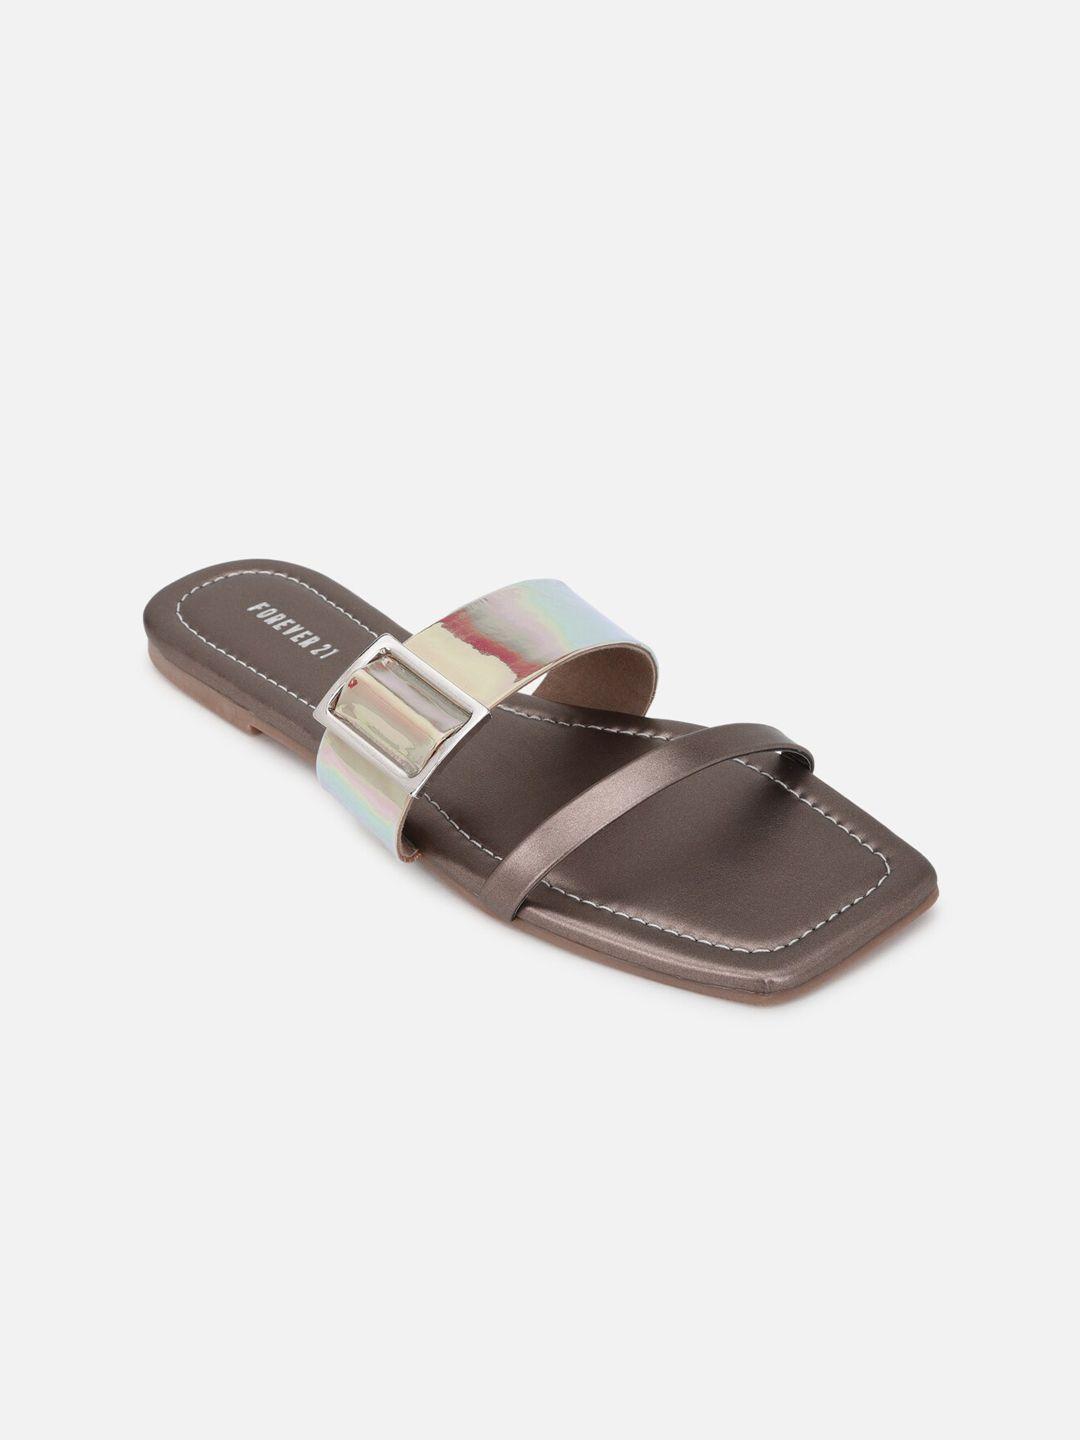 forever-21-women-brown-colourblocked-mules-with-buckles-flats